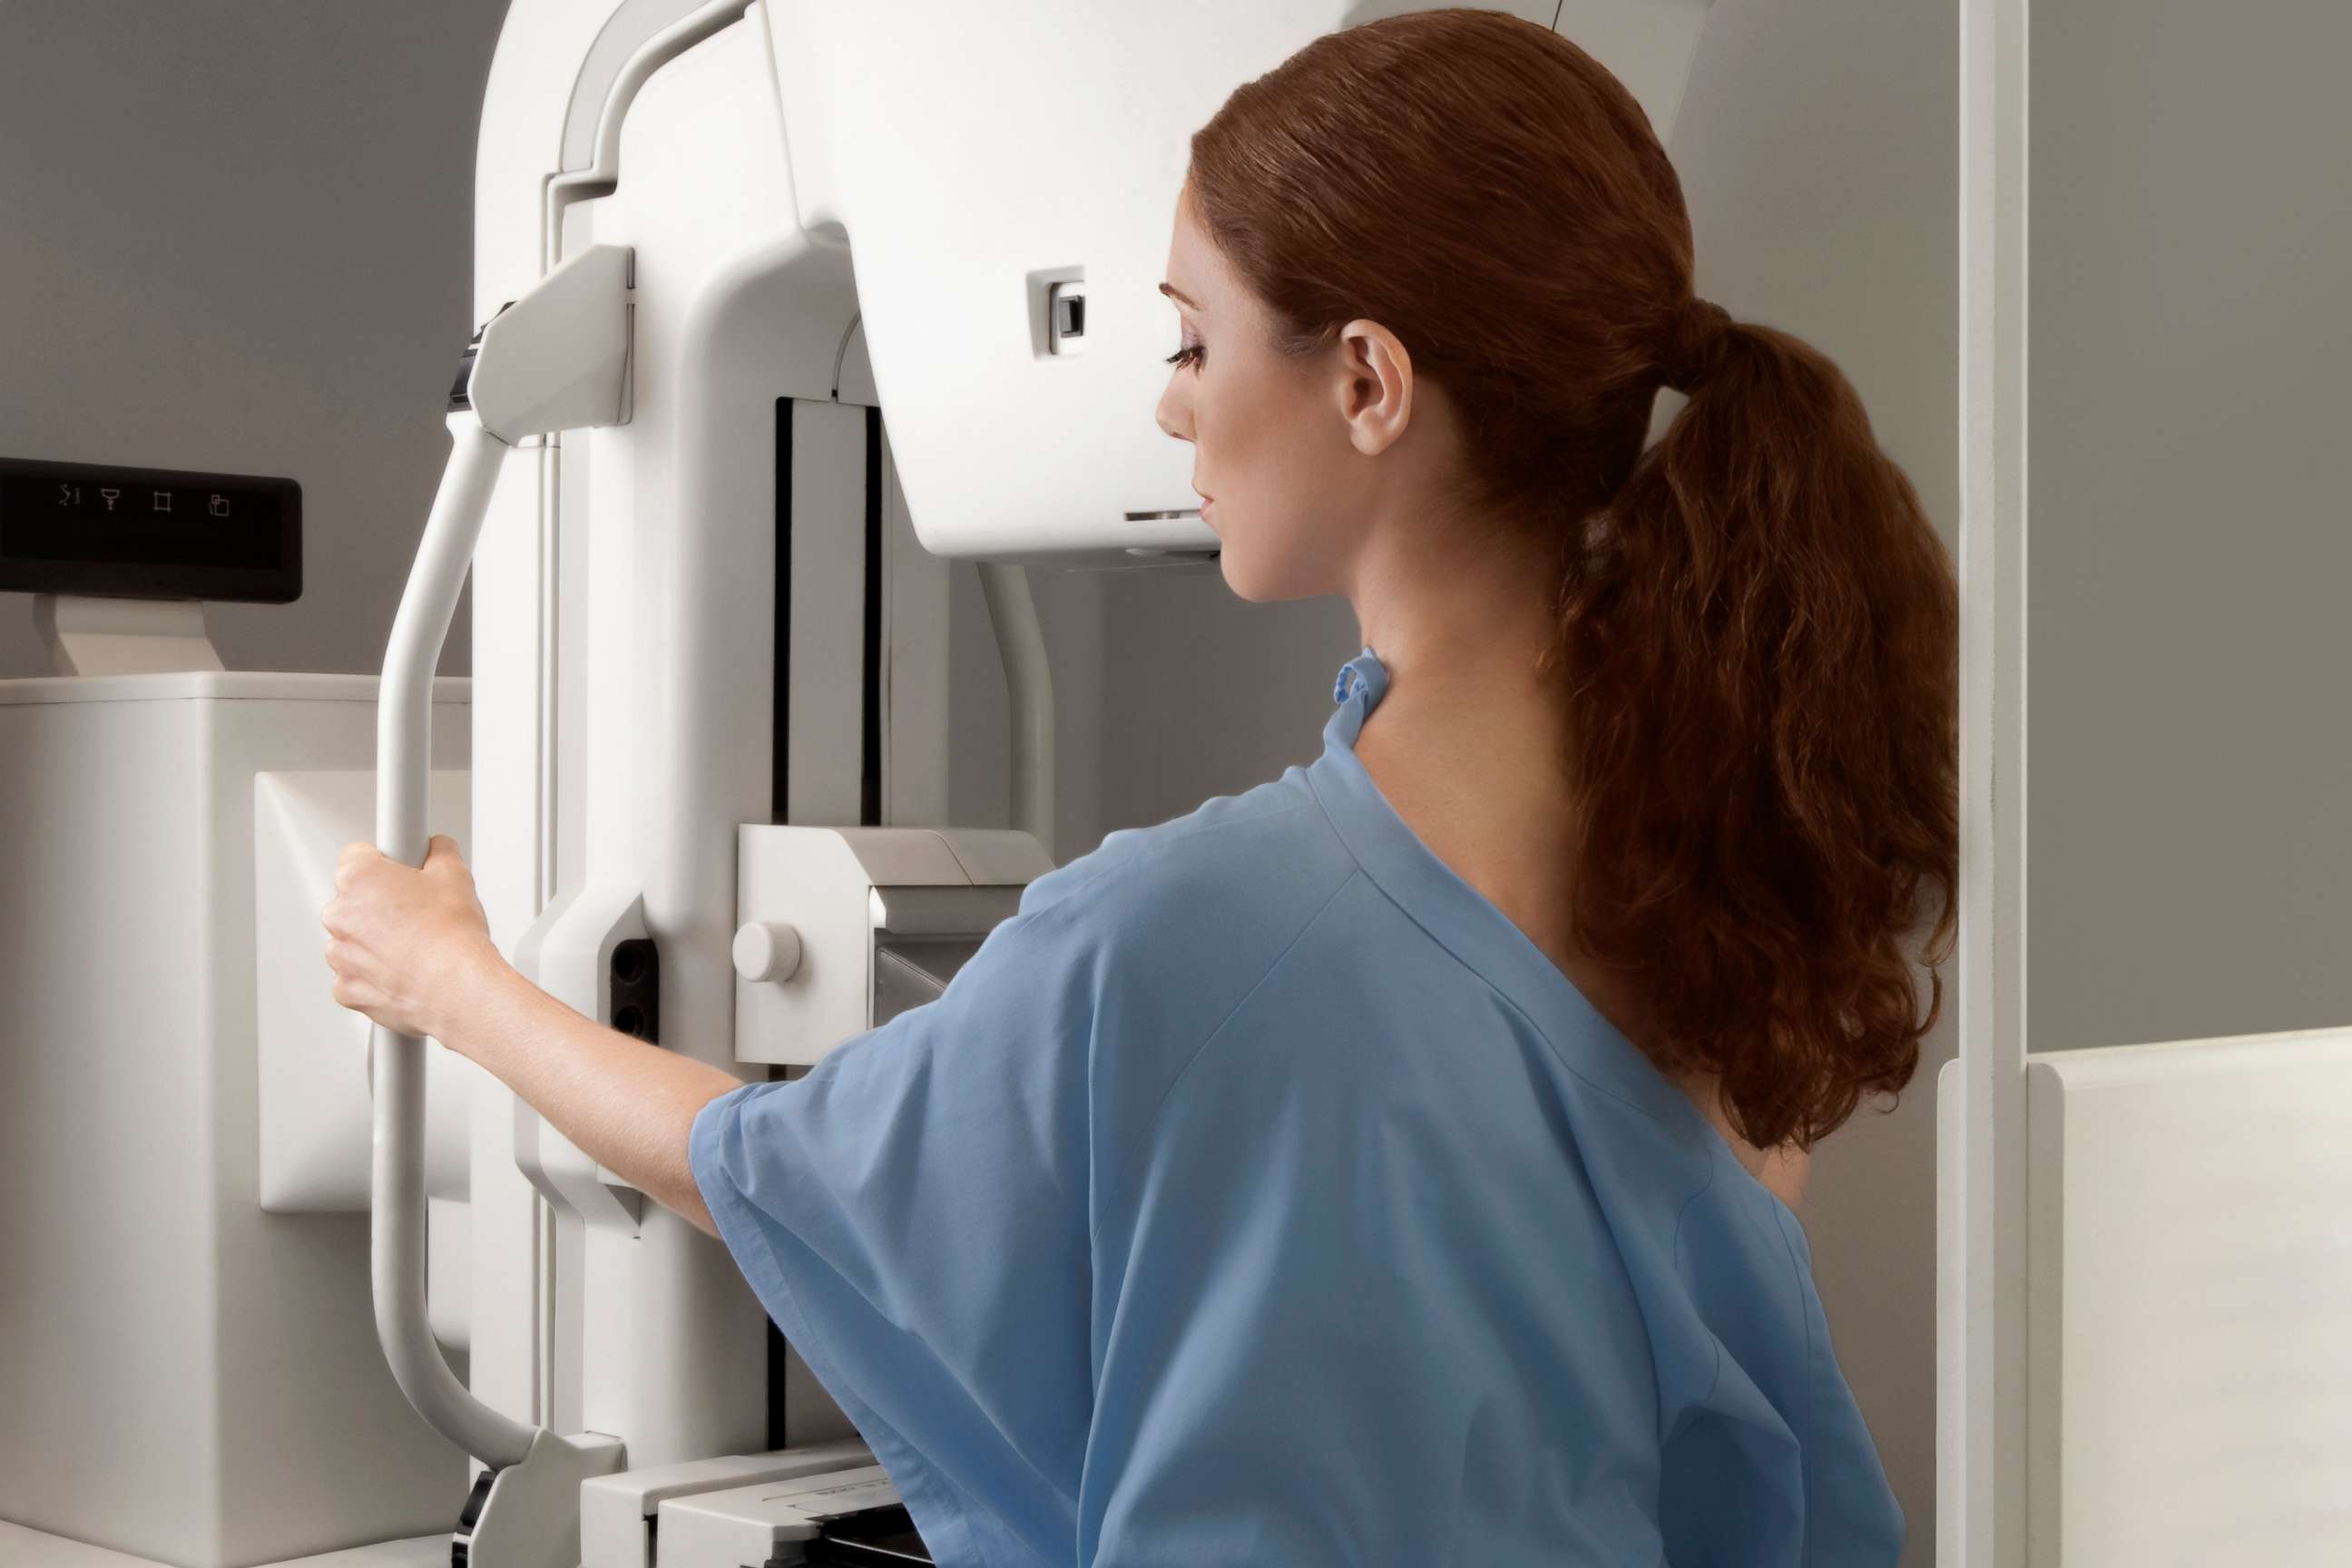 PHOTO: A woman gets a mammogram in this undated stock image.